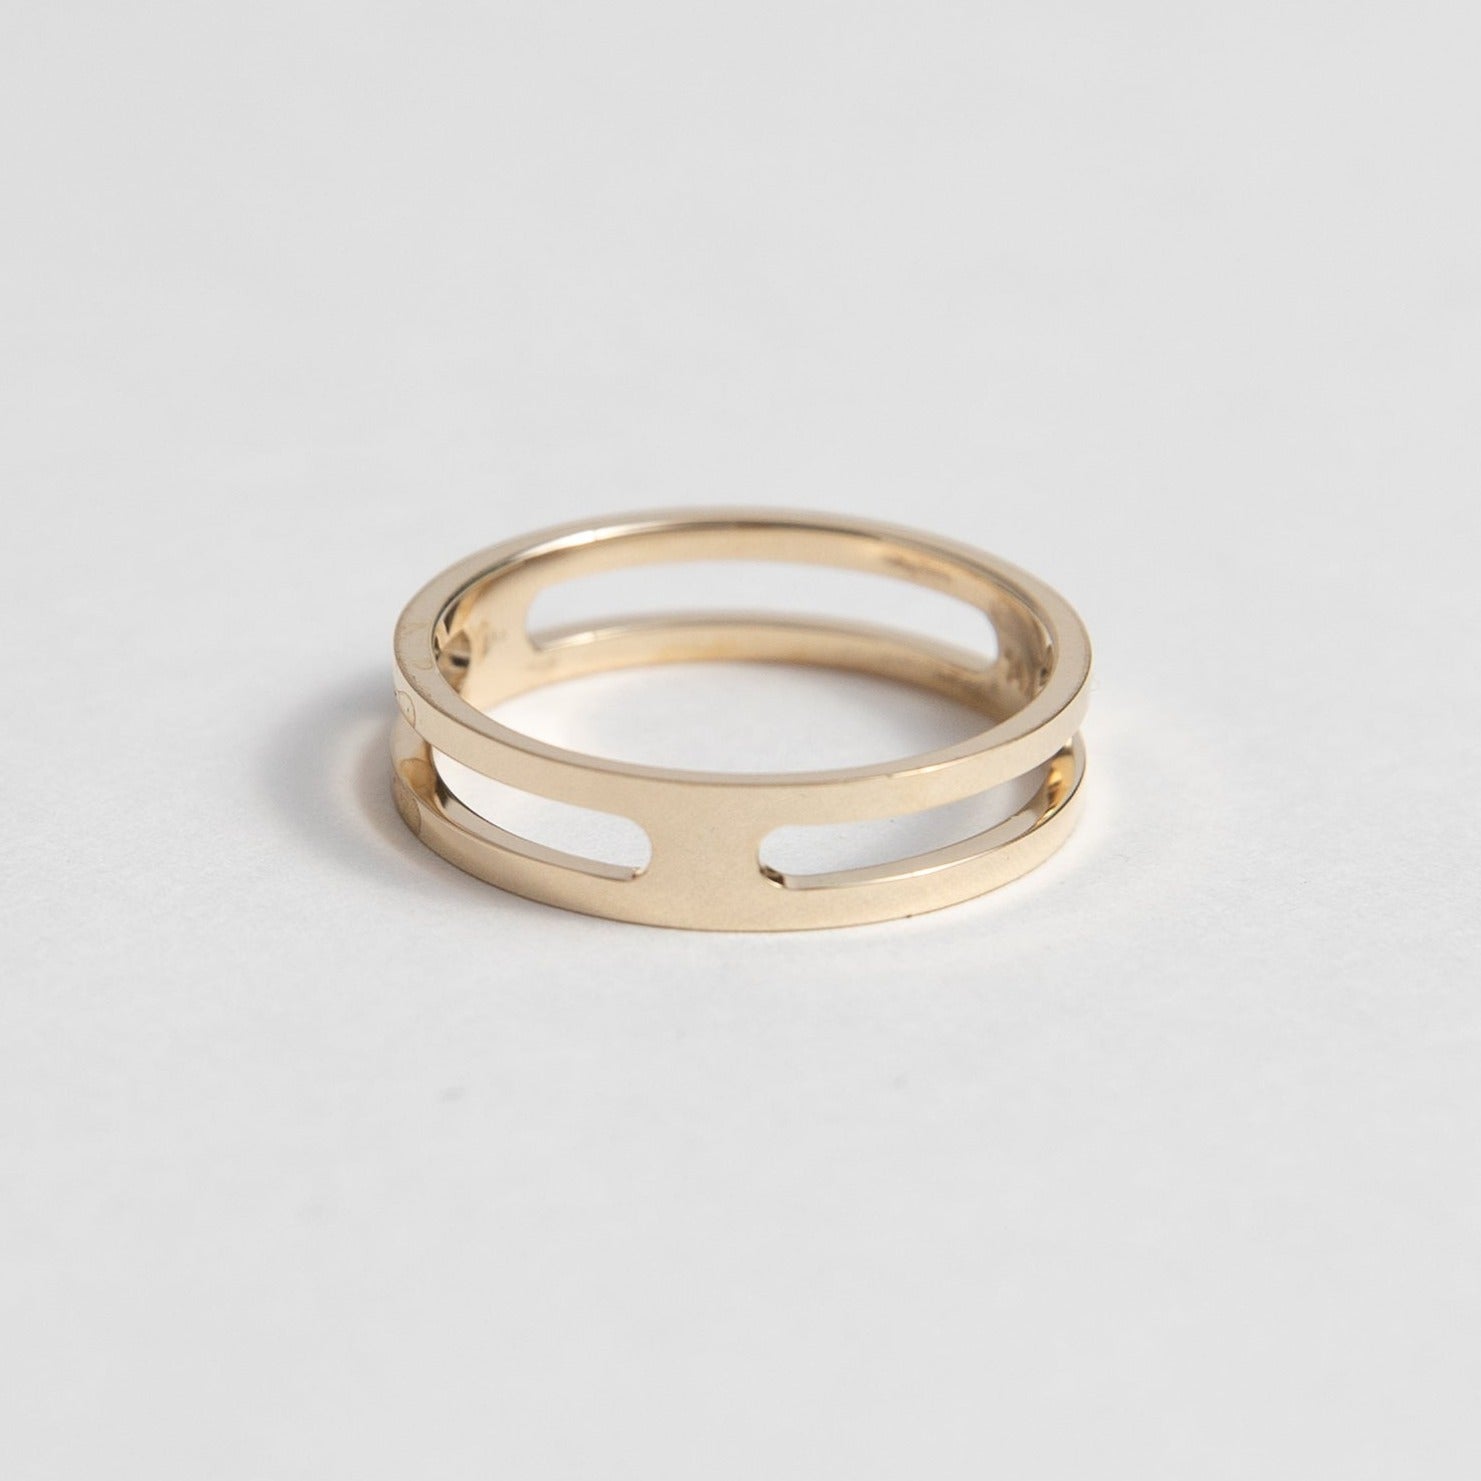 Mesi Designer Ring in 14k Yellow Gold by SHW Fine Jewelry in NYC